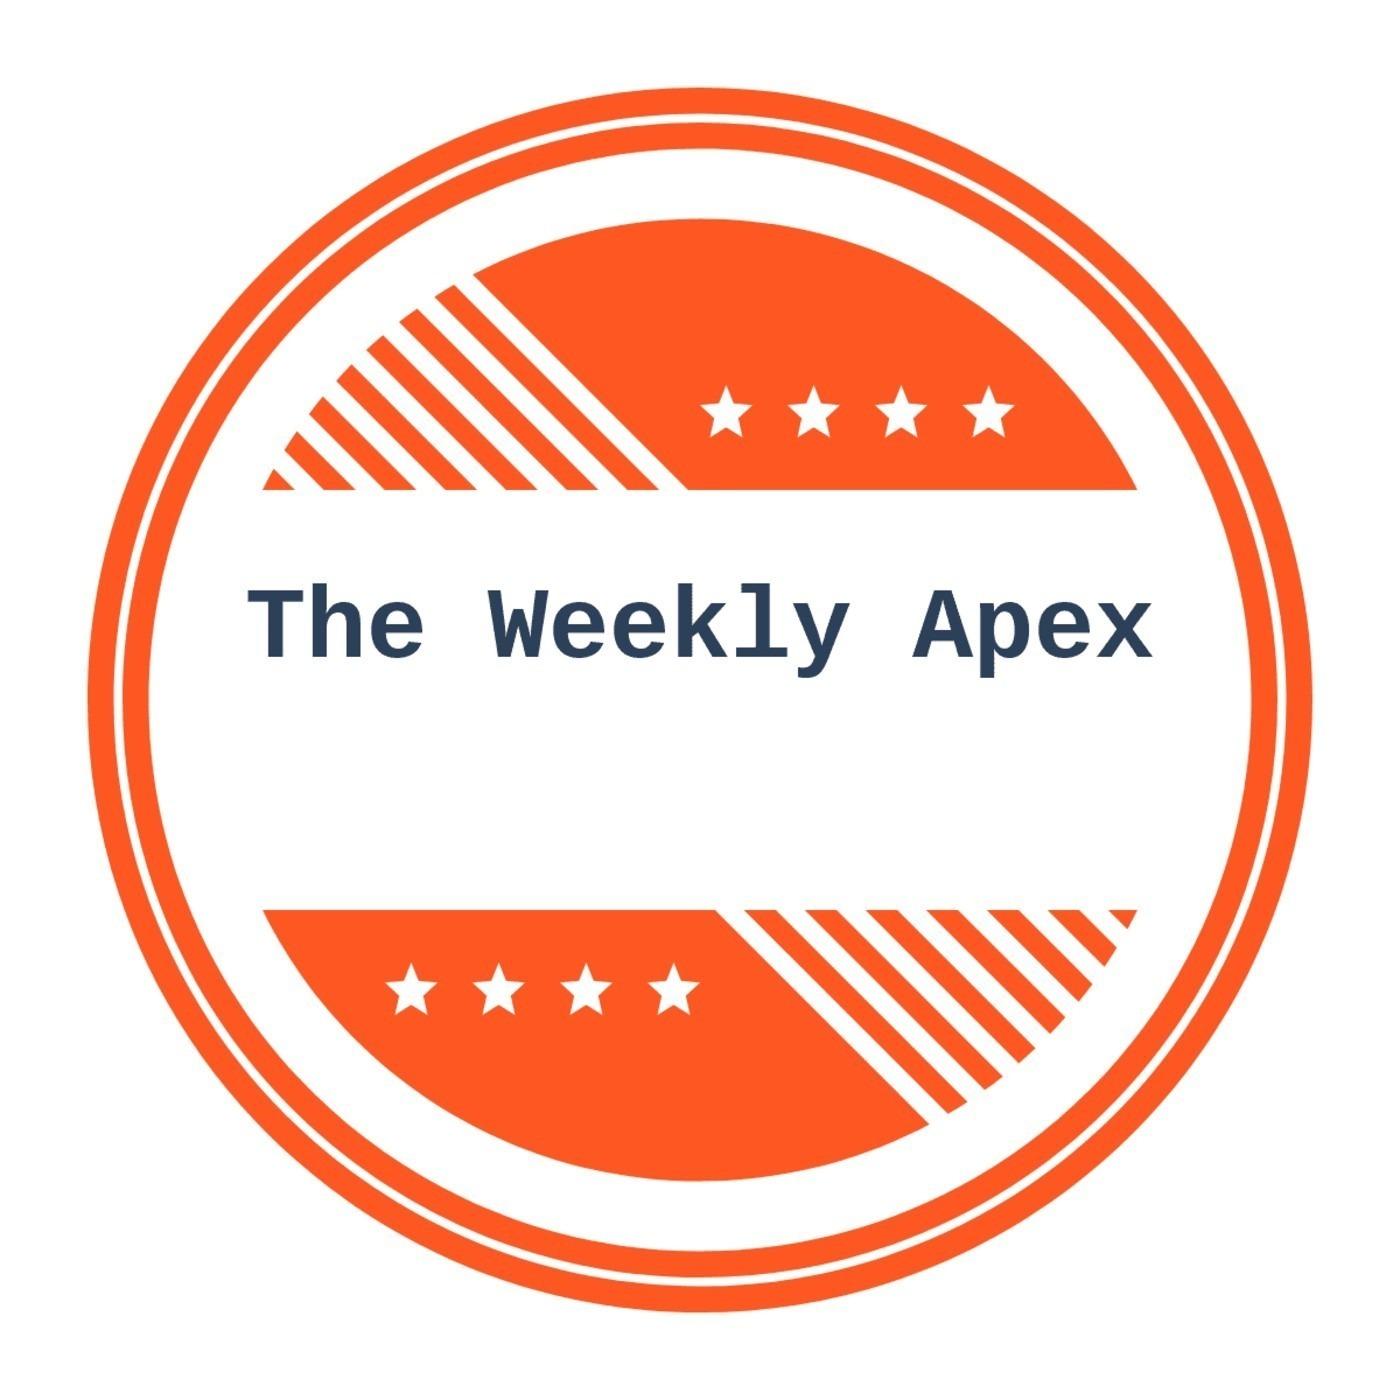 The Weekly Apex